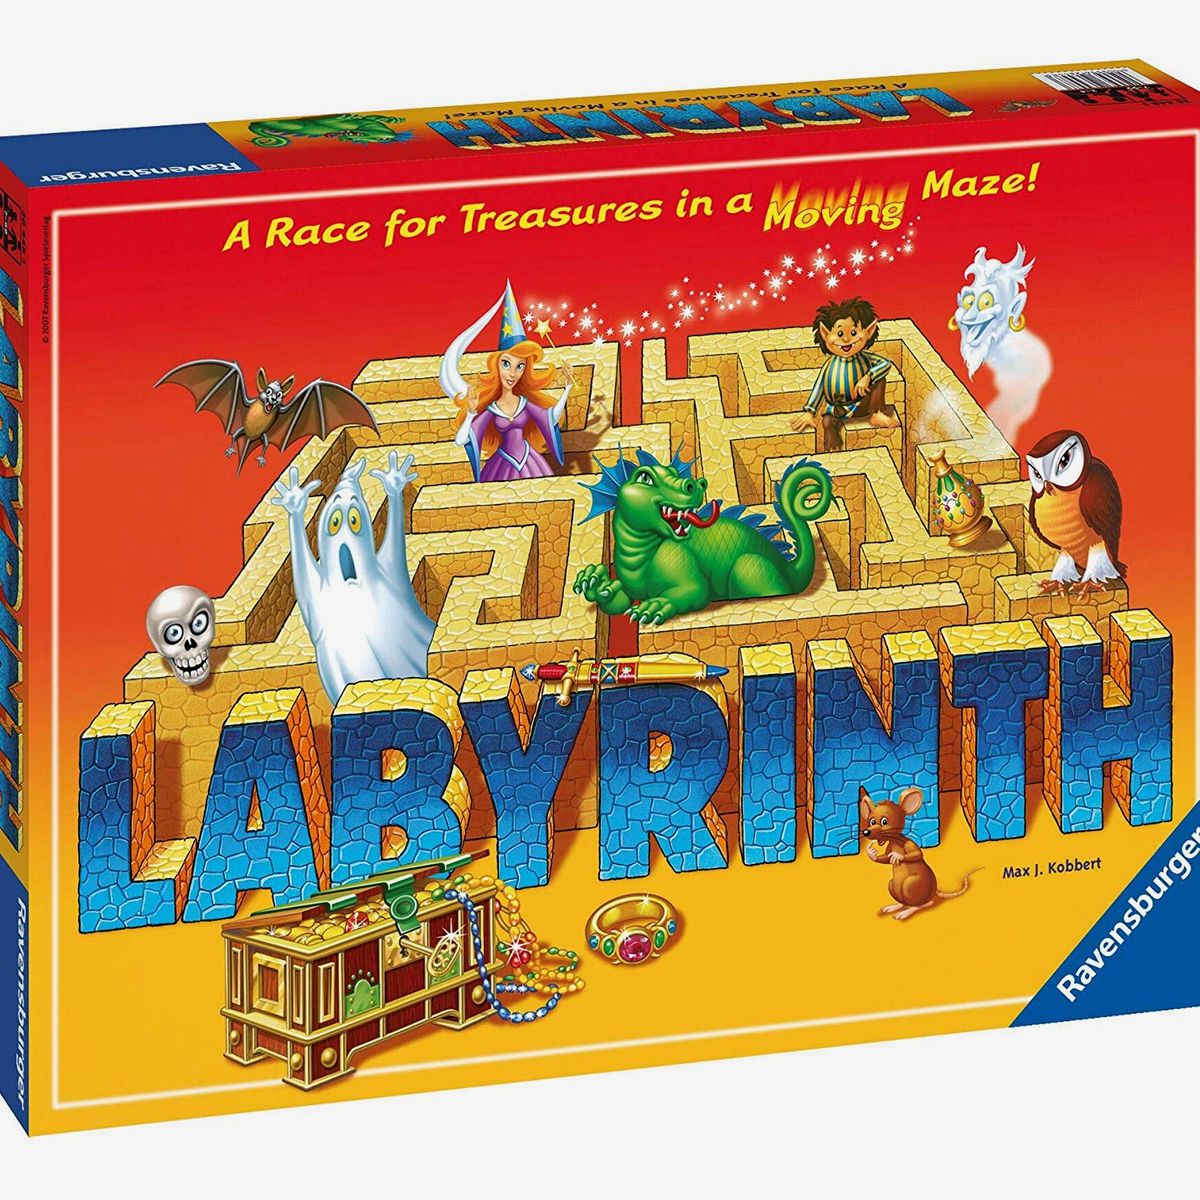 Traditional Retro Board Game Fun Gift Board Games For The Whole Family Kids